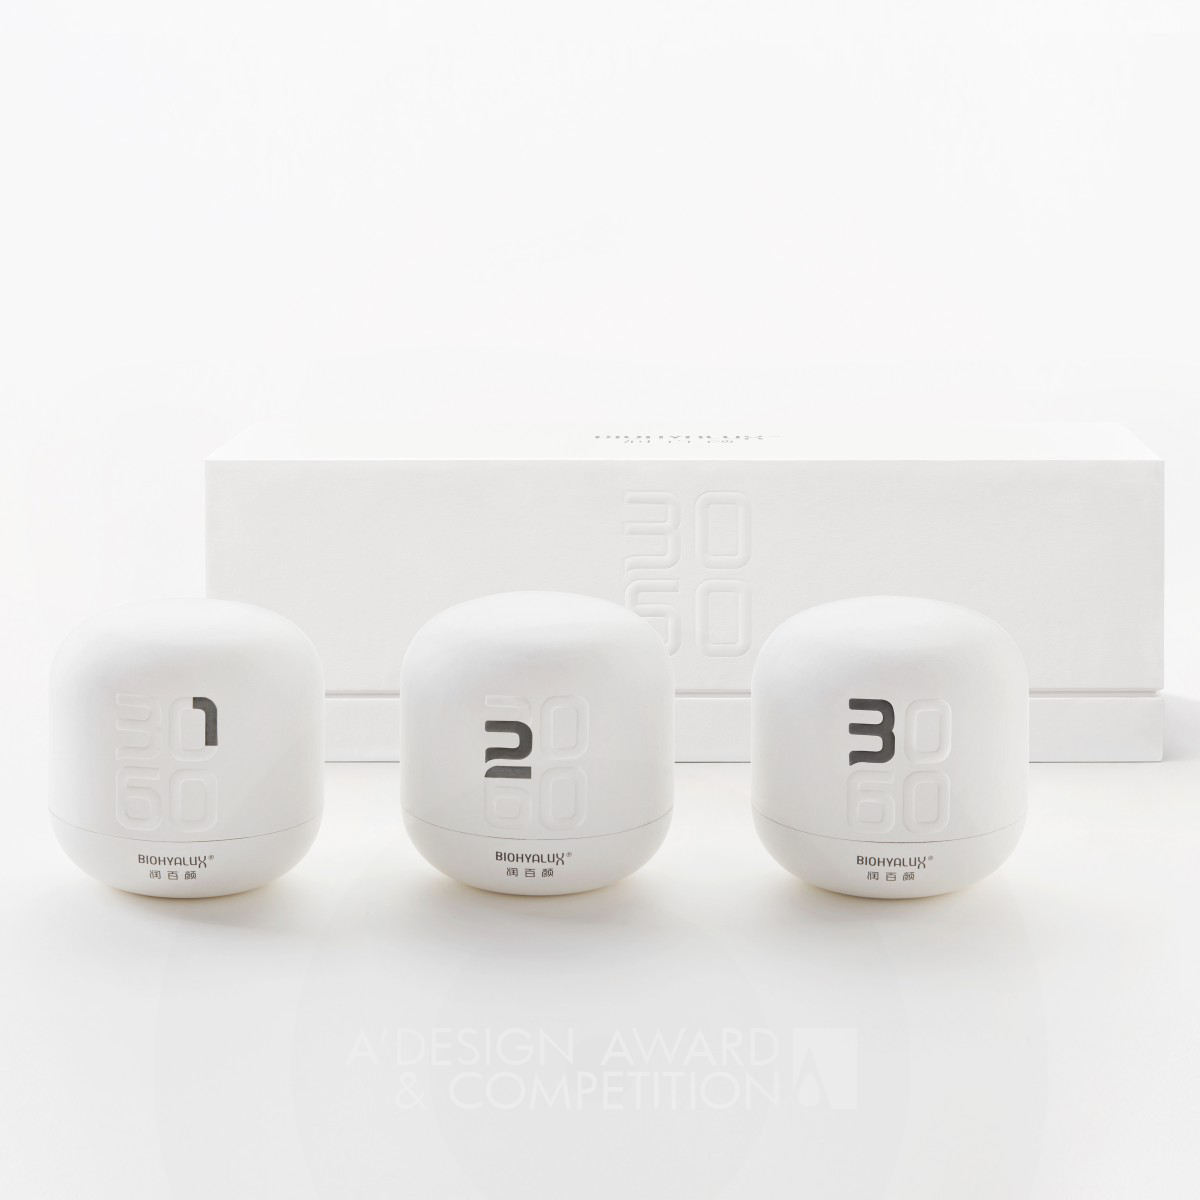 Bionyalux Skin Care Package by 33 and Branding